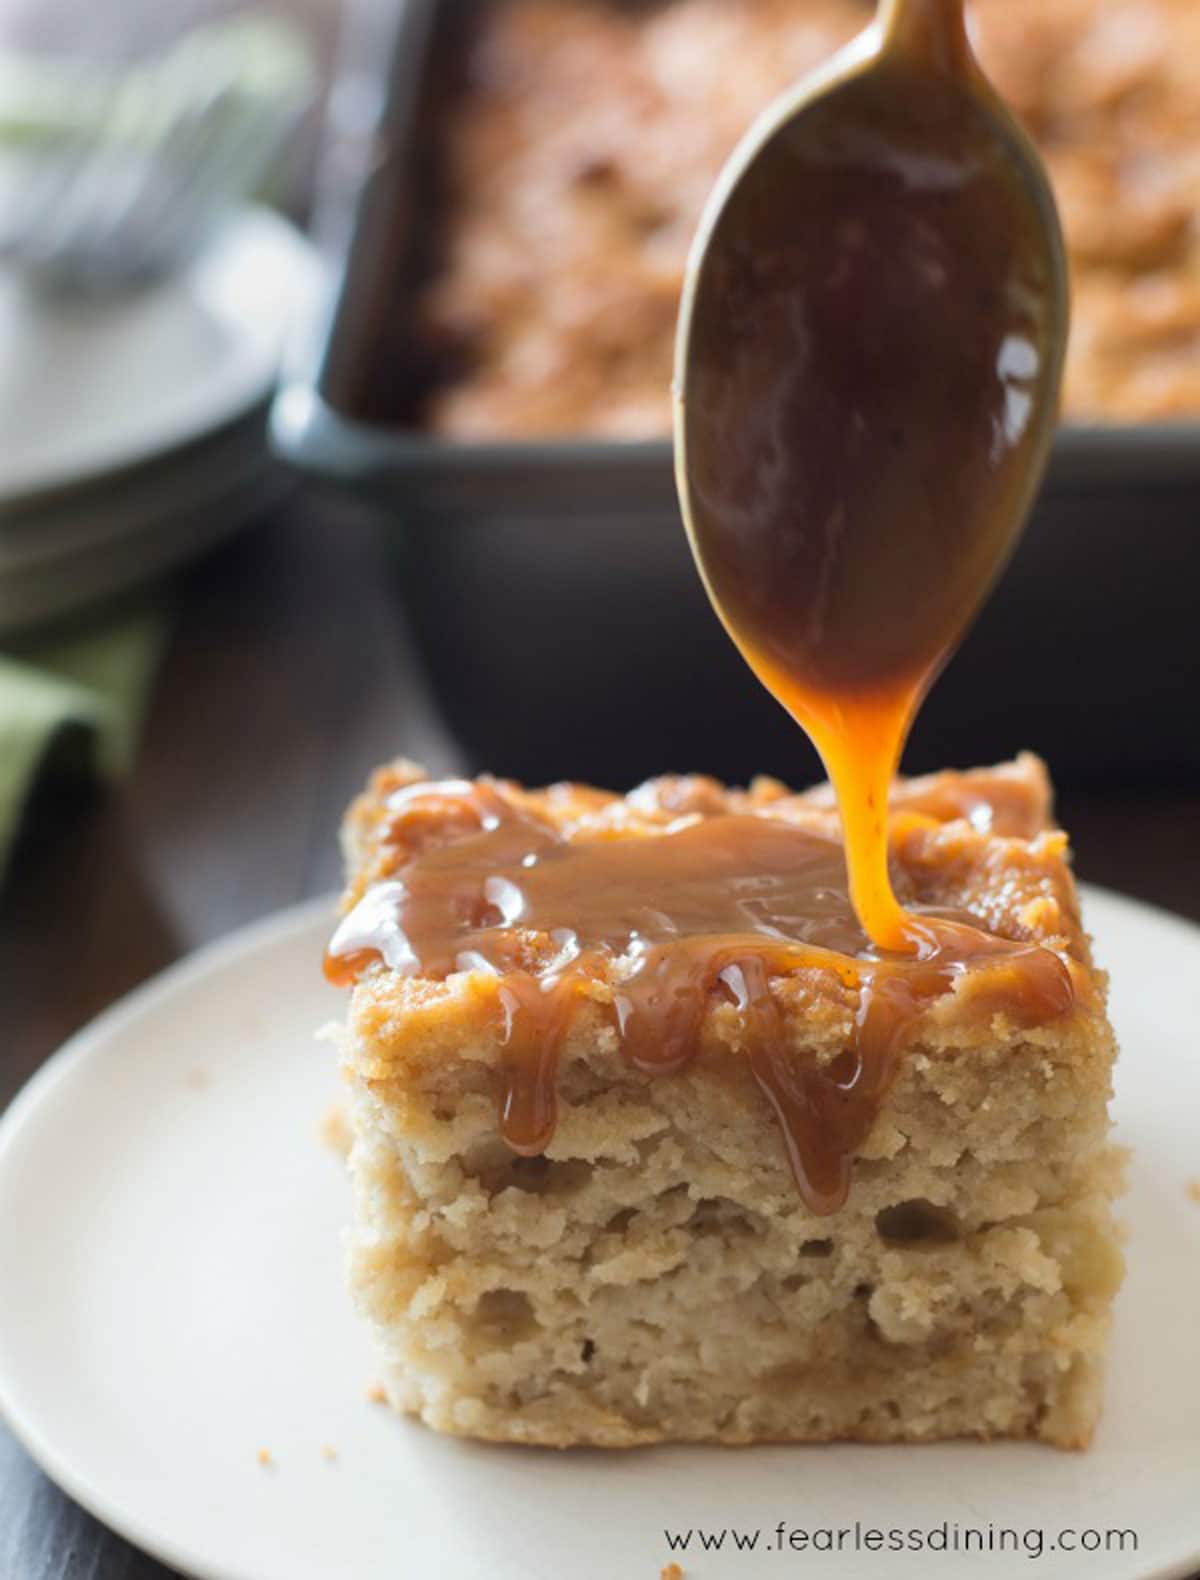 A spoon drizzling caramel over a slice of apple cake.